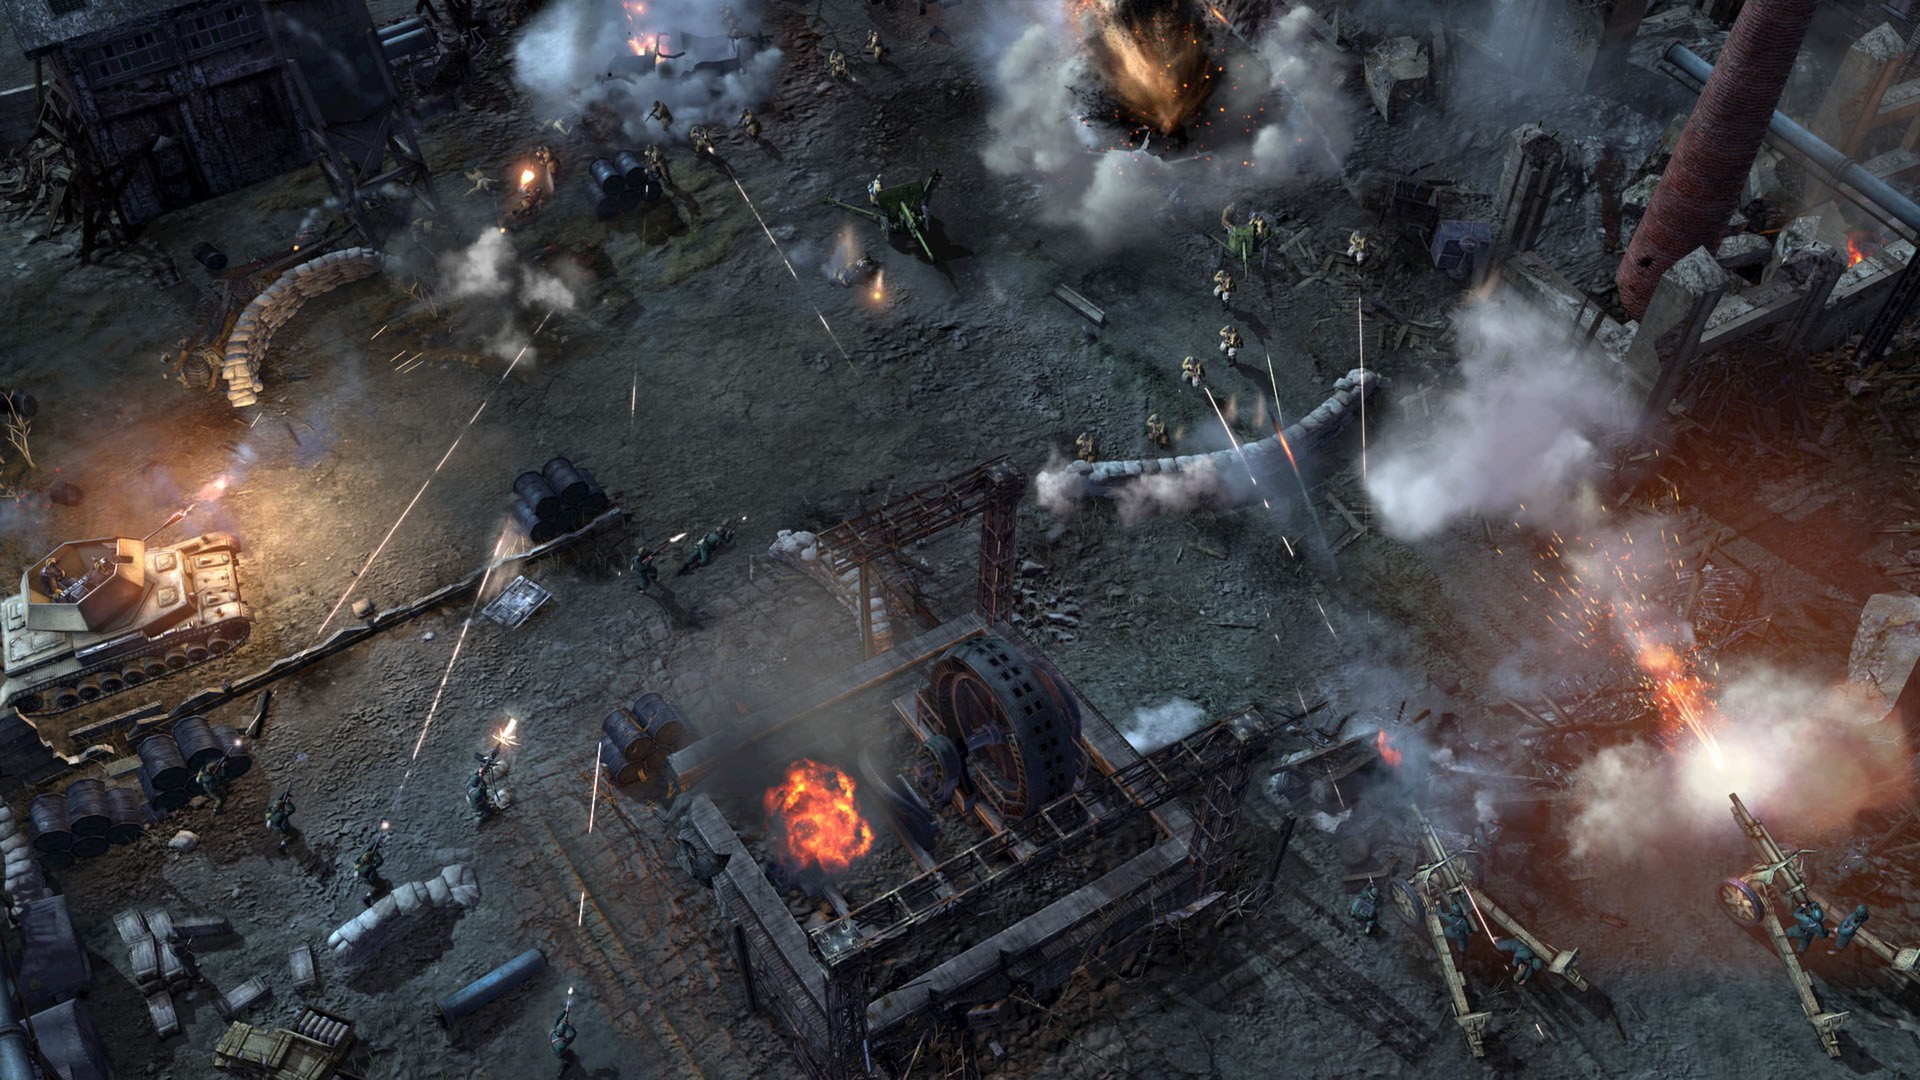 company of heroes 2 - the western front armies: oberkommando west steam